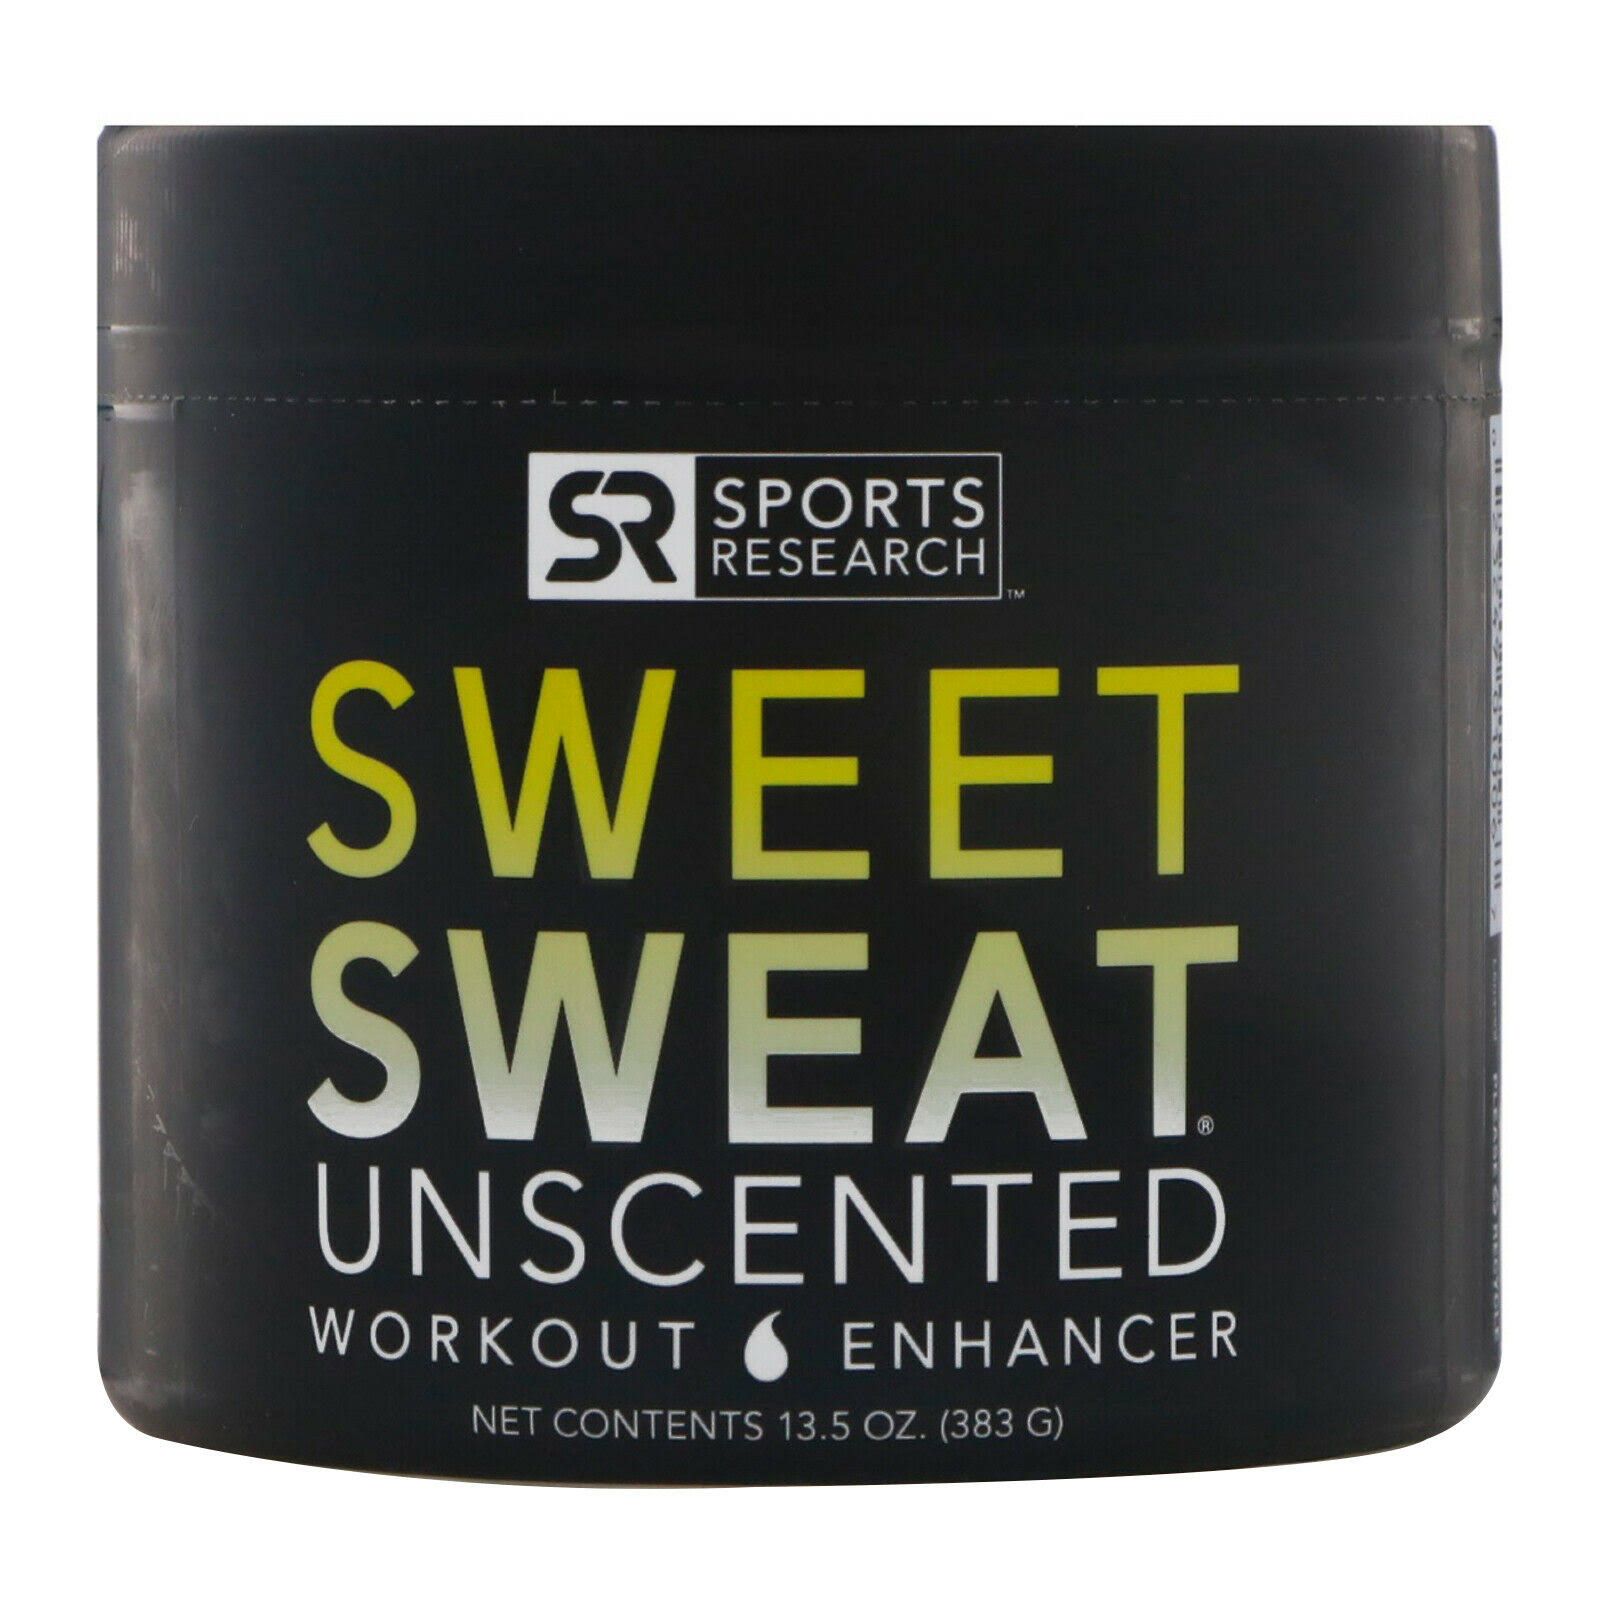 Sports Research Sweet Sweat Workout Enhancer - Unscented, 13.5oz